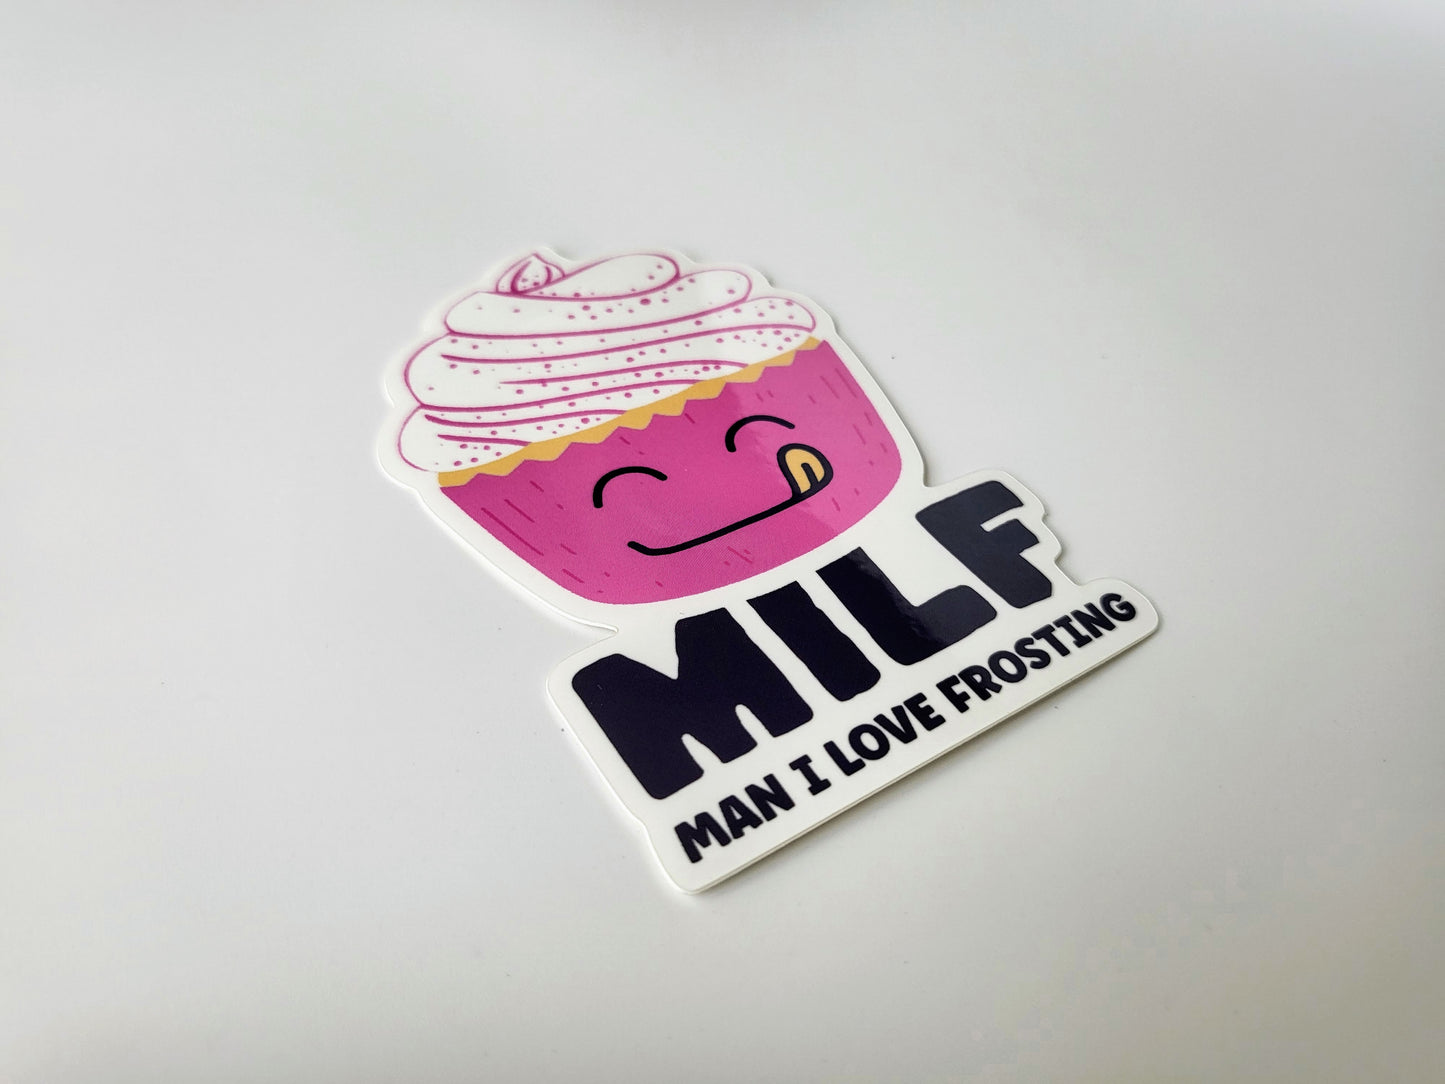 MILF - Man I Love Frosting funny Sticker for Pastry Lovers and Bakers